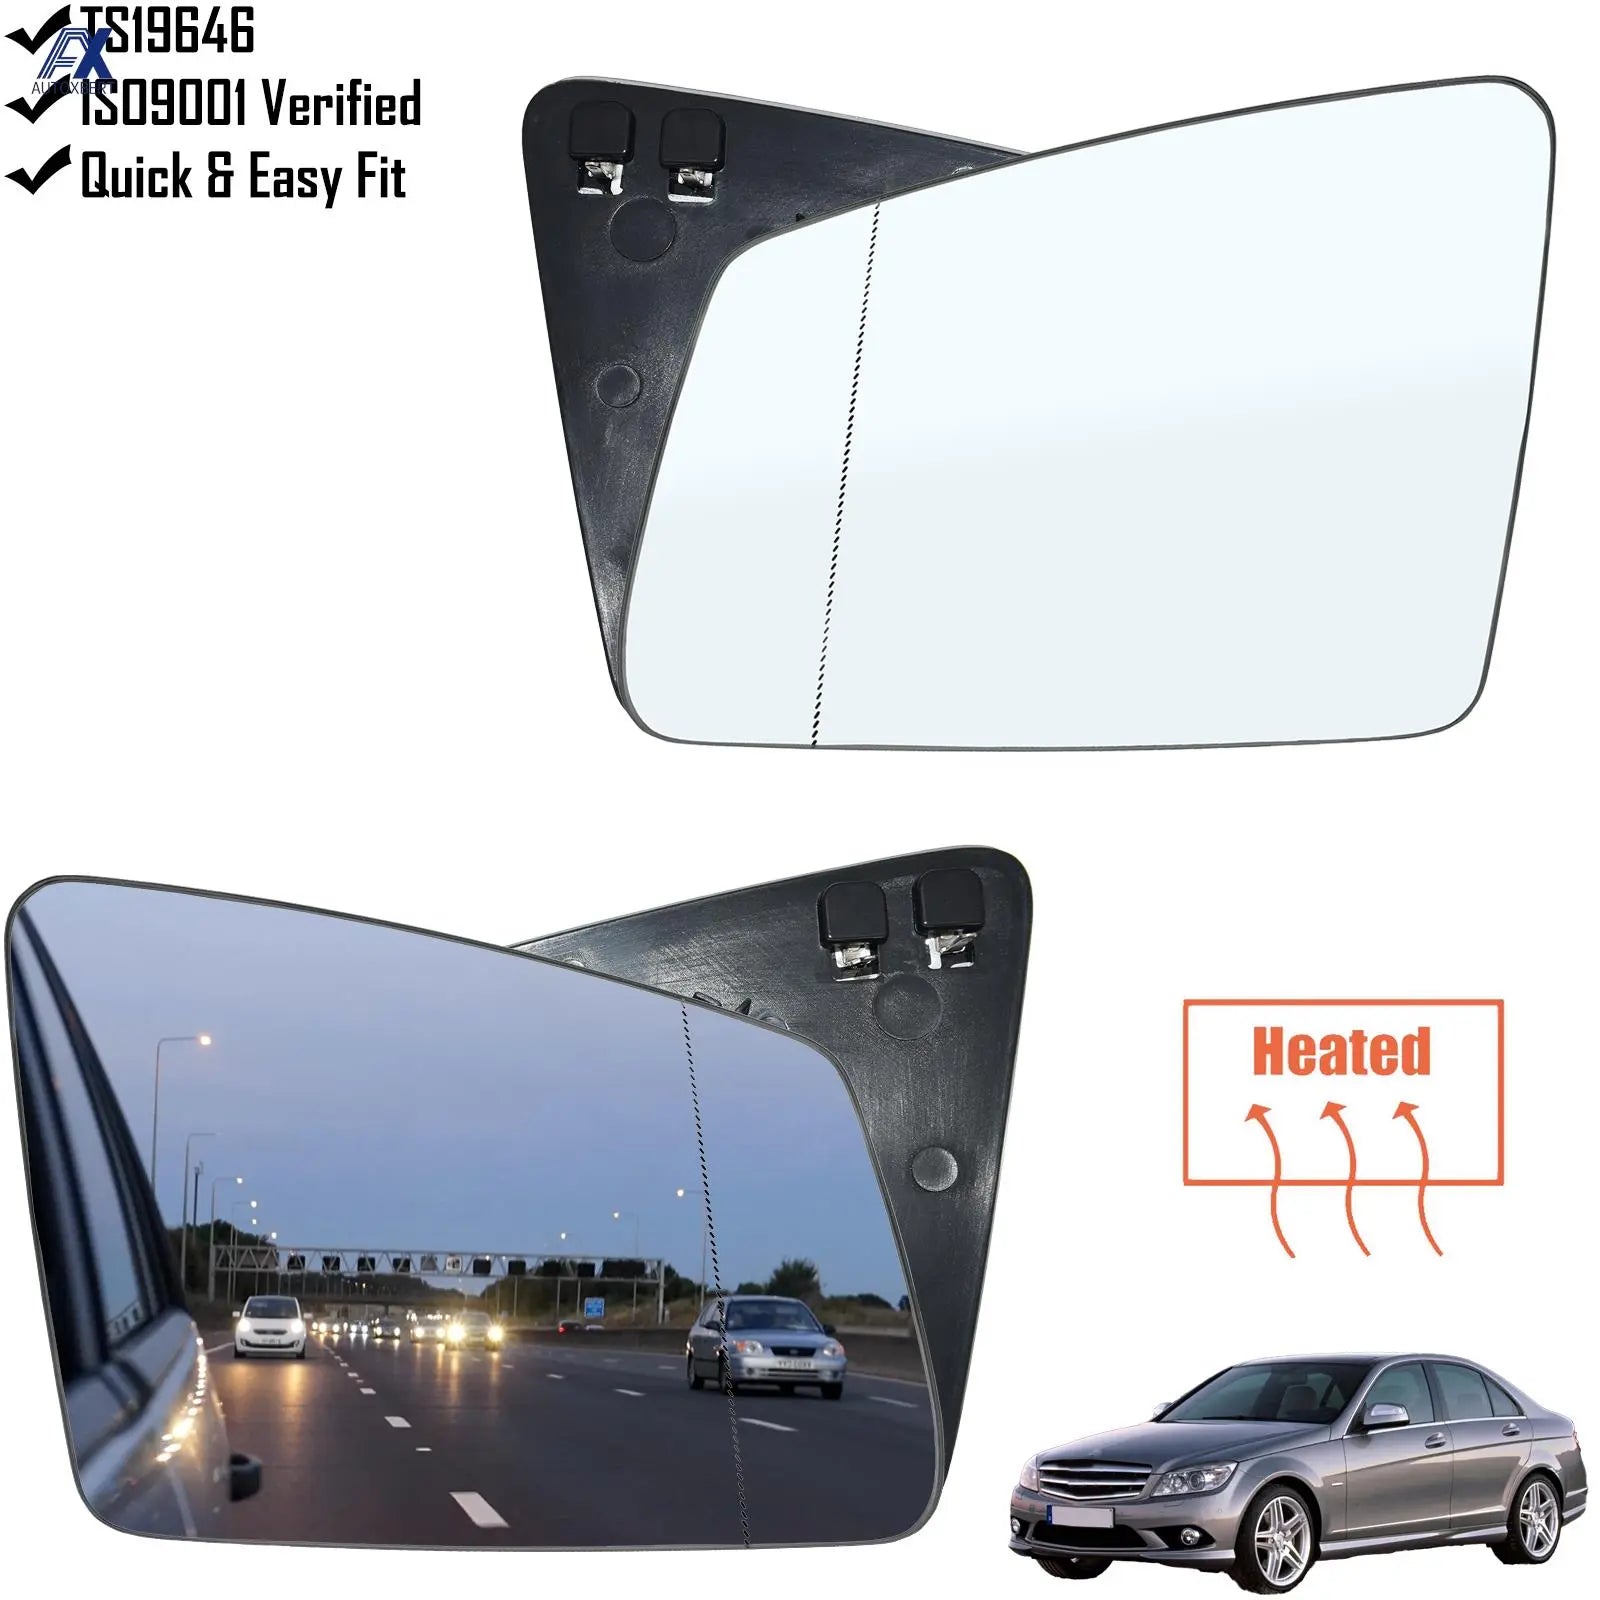 For Benz S C E Class W212 W204 Left & Right Side Heated Wing Door Mirror Rearview Rear View Glass Car Accessories Body Kit Parts